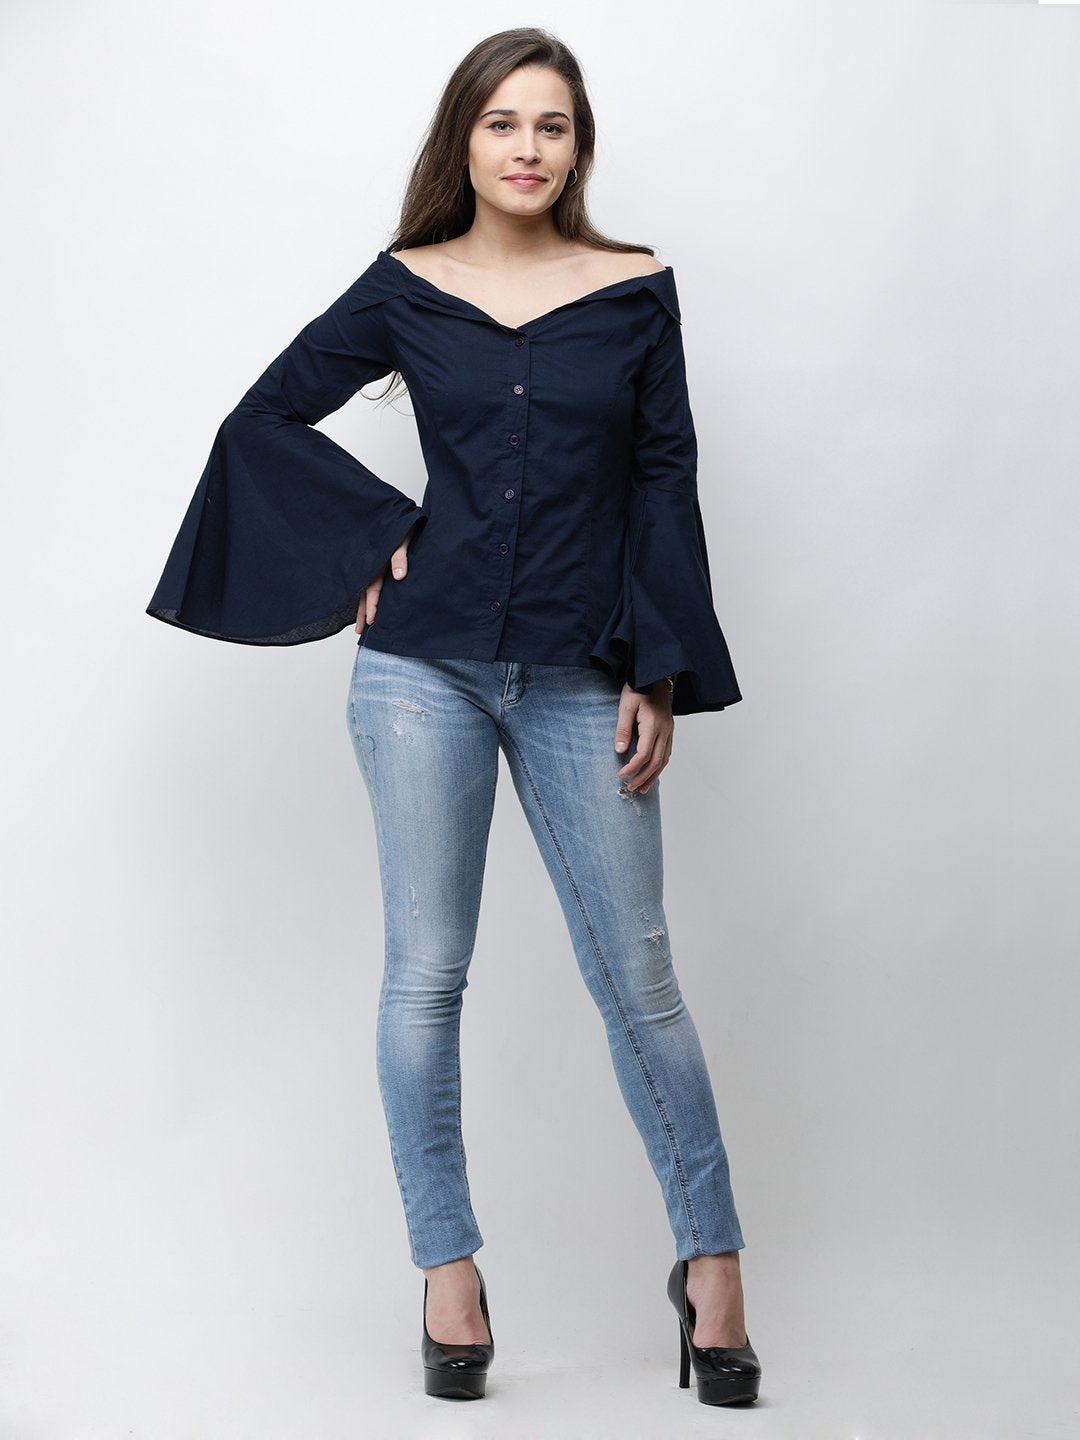 Cation Navy Blue Solid Shirt